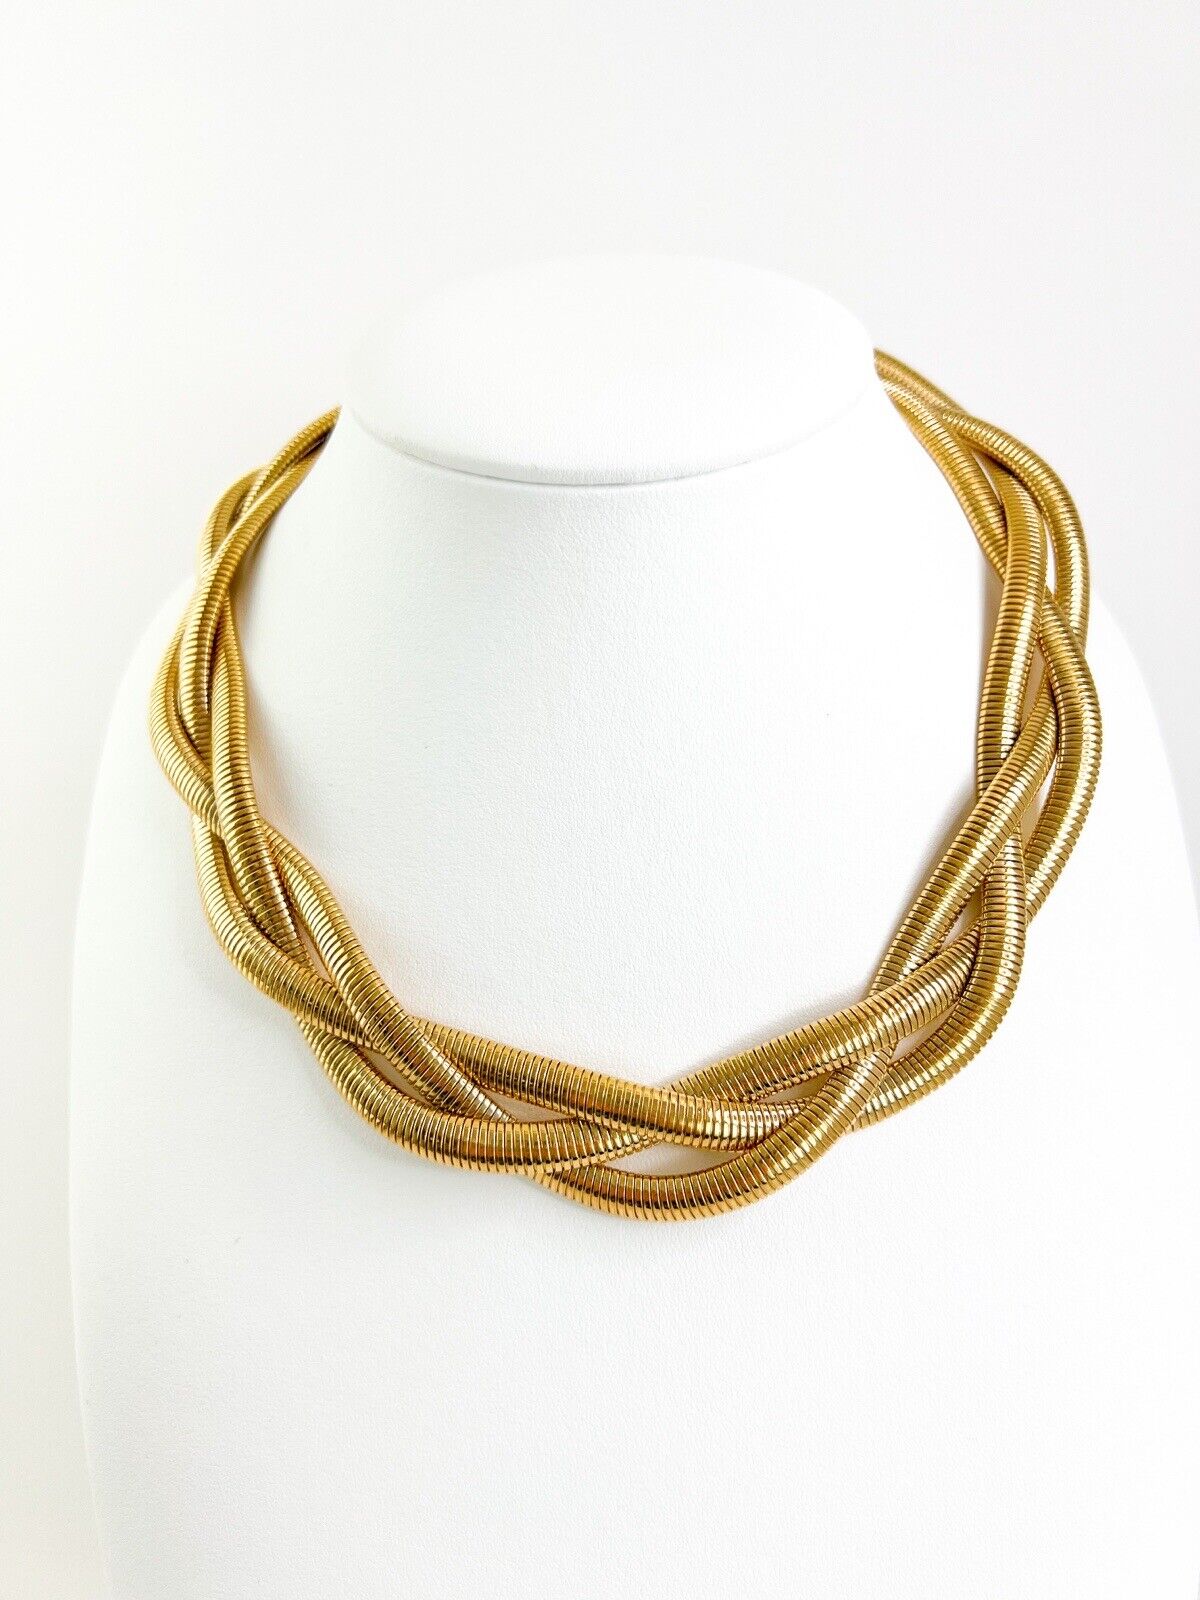 Givenchy Vintage Choker Necklace Chain Gold